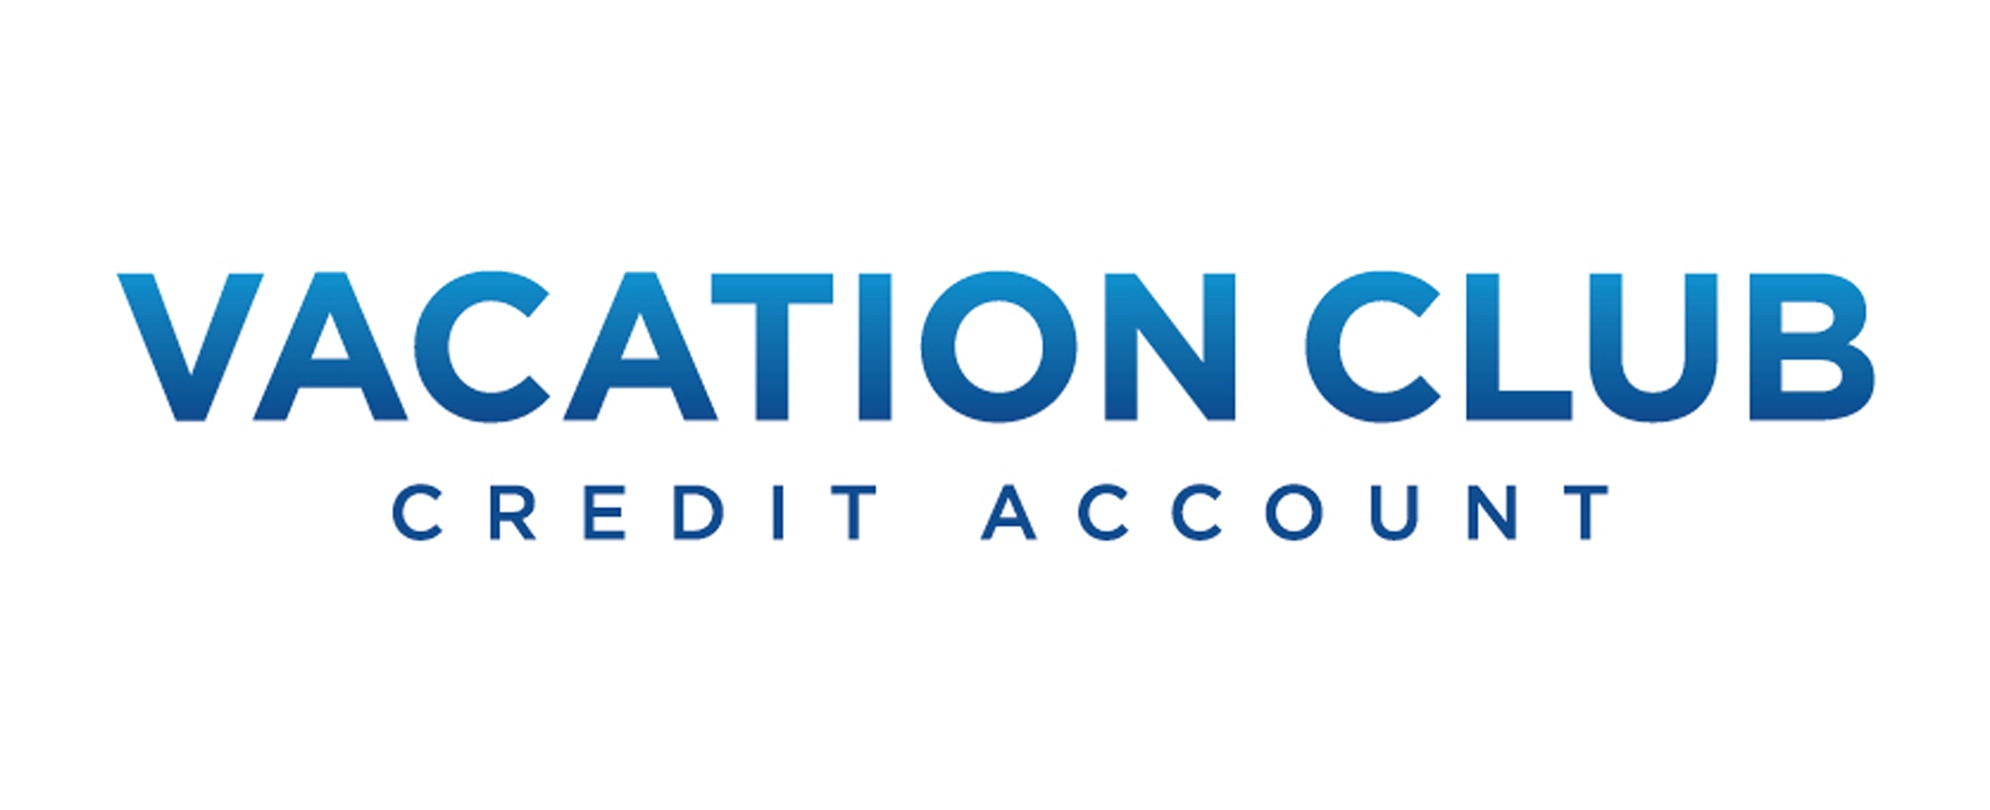 The logo for Vacation Club Credit Account.